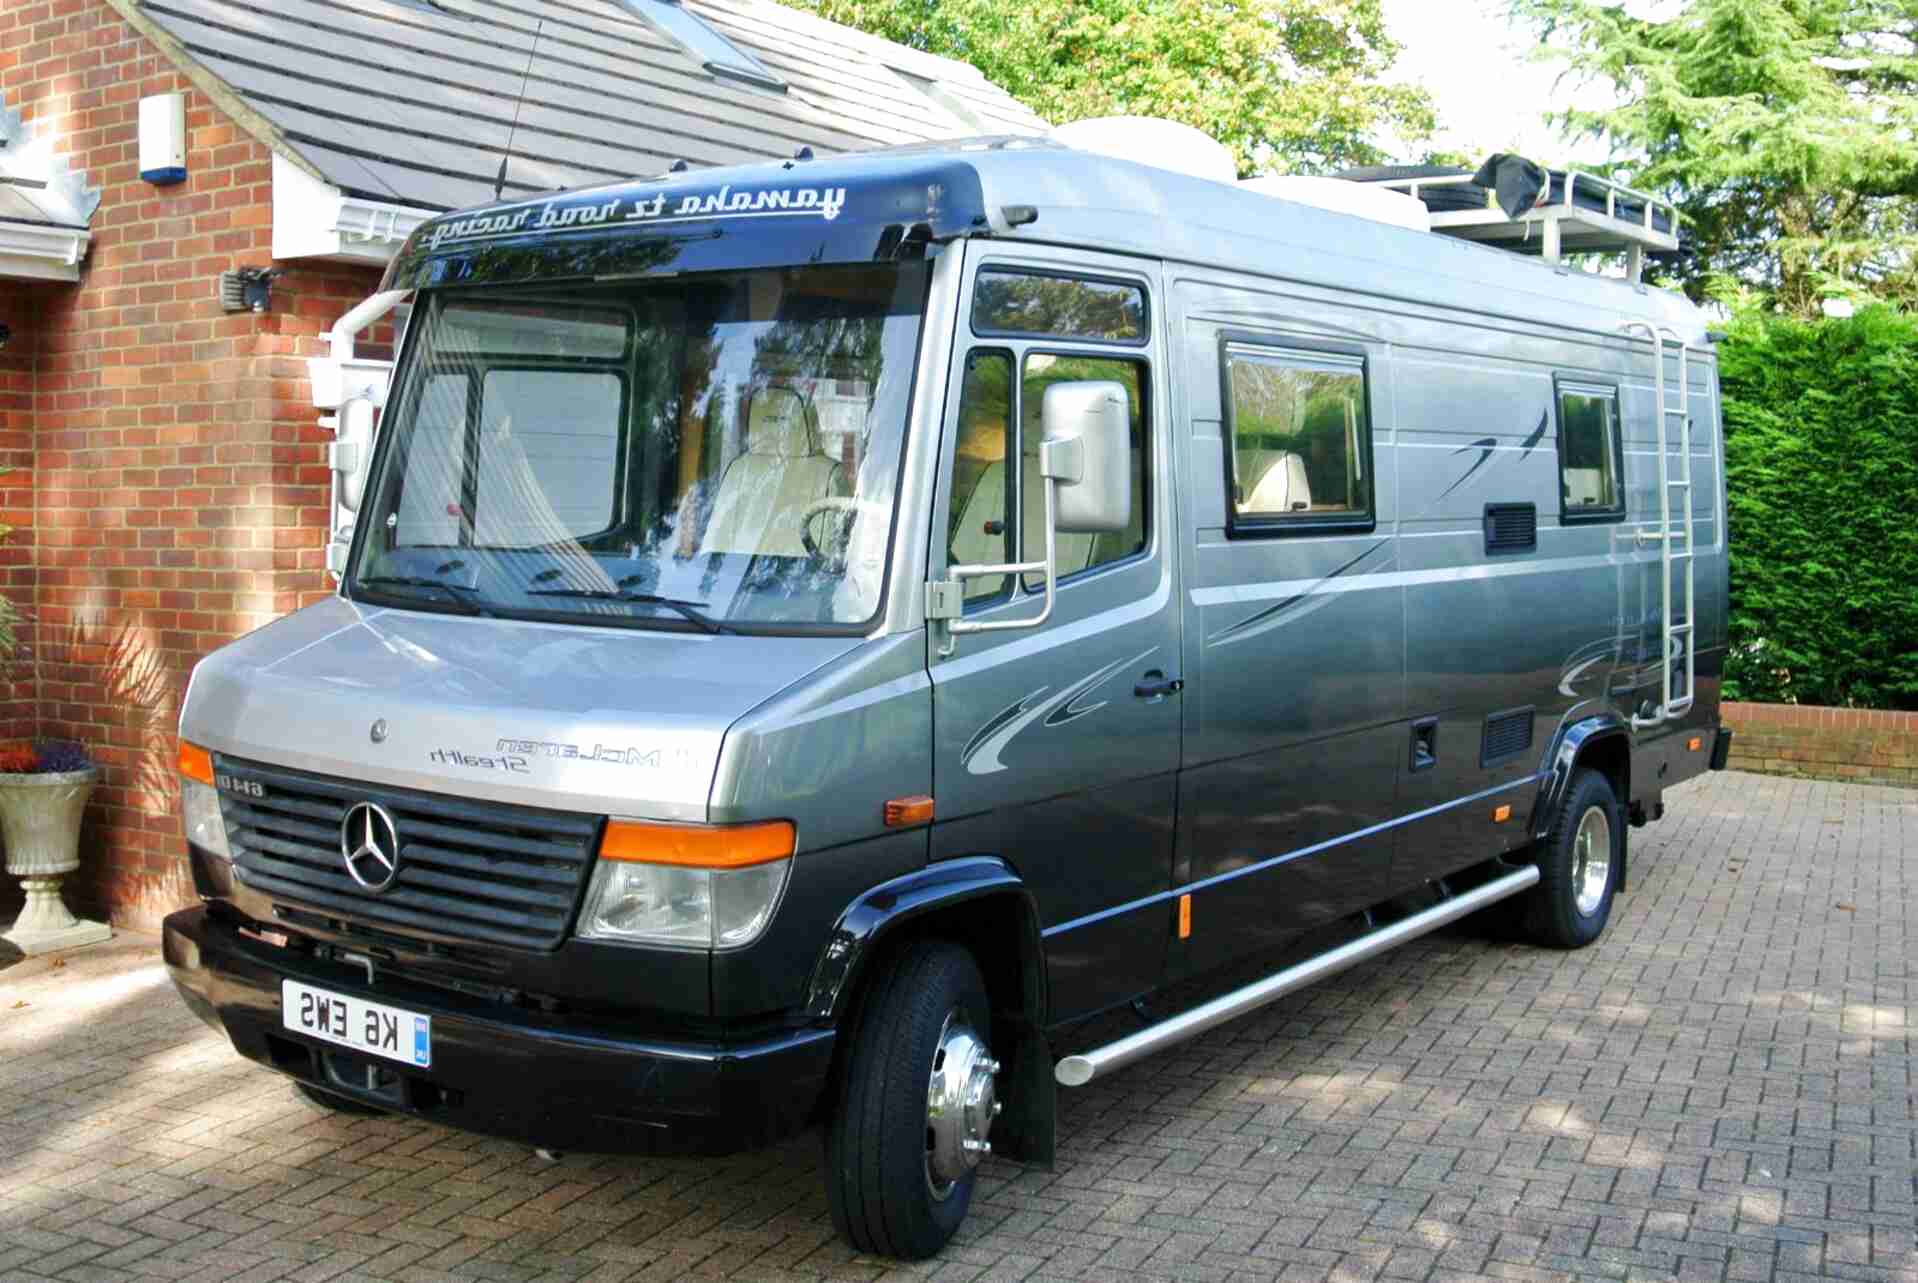 Mercedes Benz Motorhome For Sale In Uk 89 Used Mercedes Benz Motorhomes